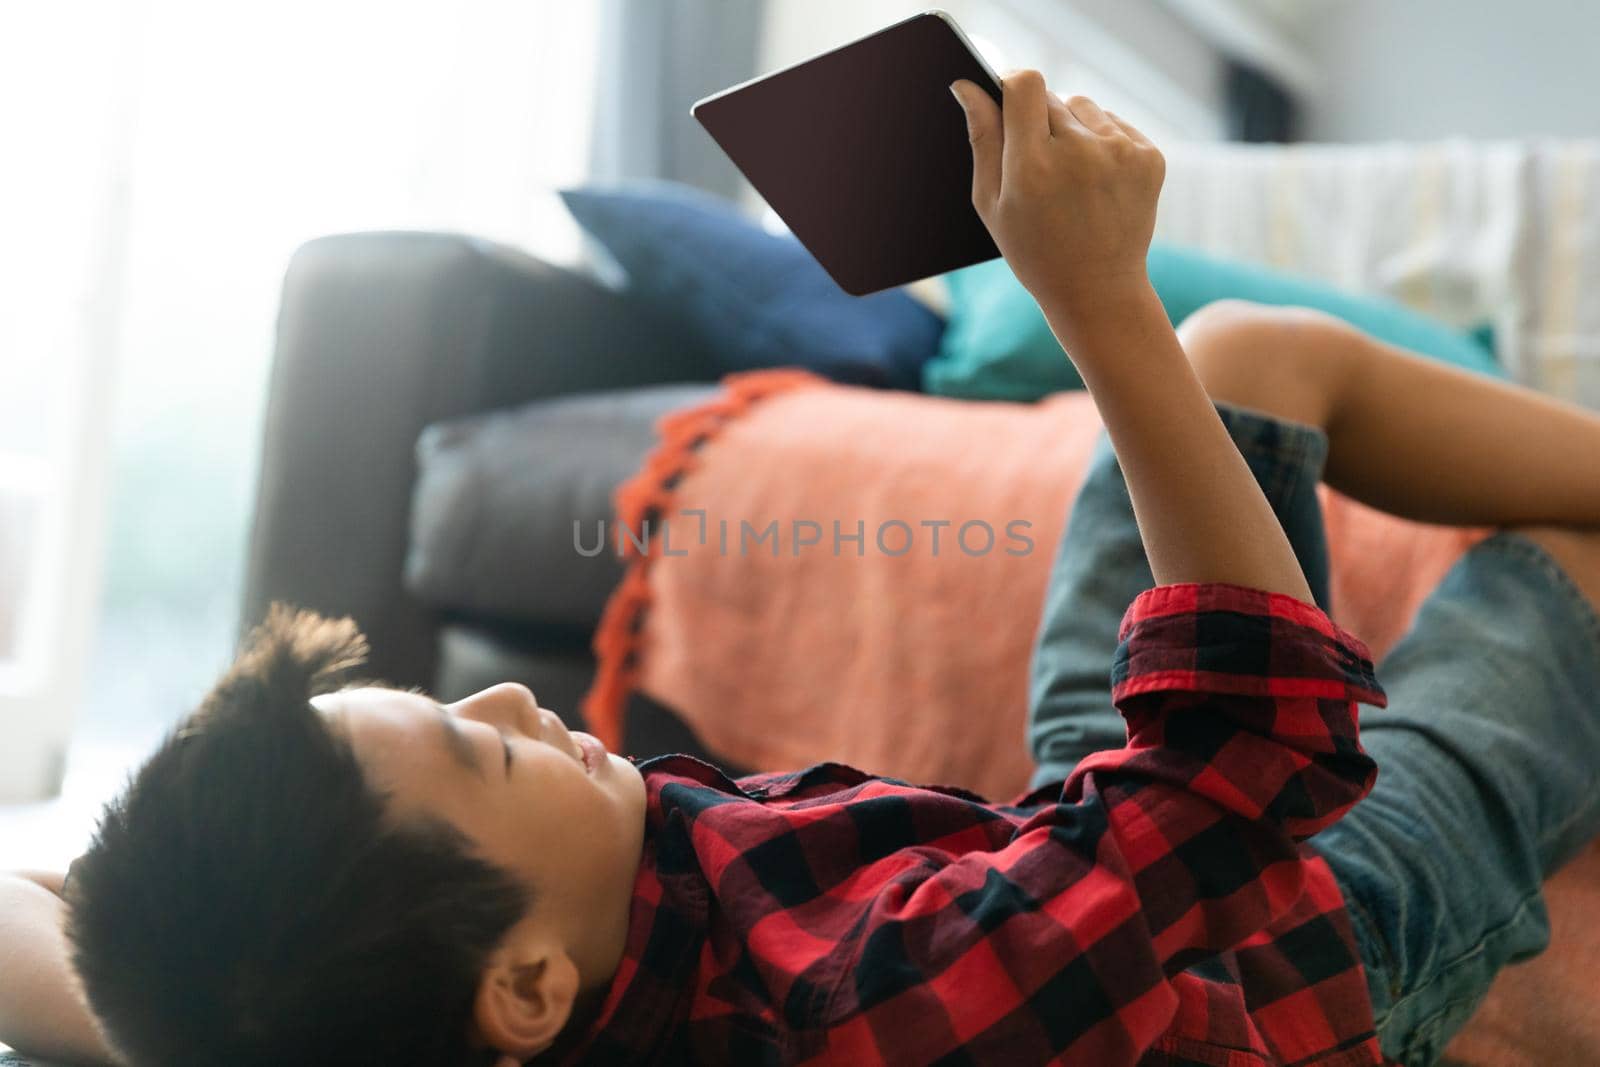 Asian boy using tablet with blank screen lying on floor at home. domestic lifestyle, leisure and technology during covid 19 pandemic concept.